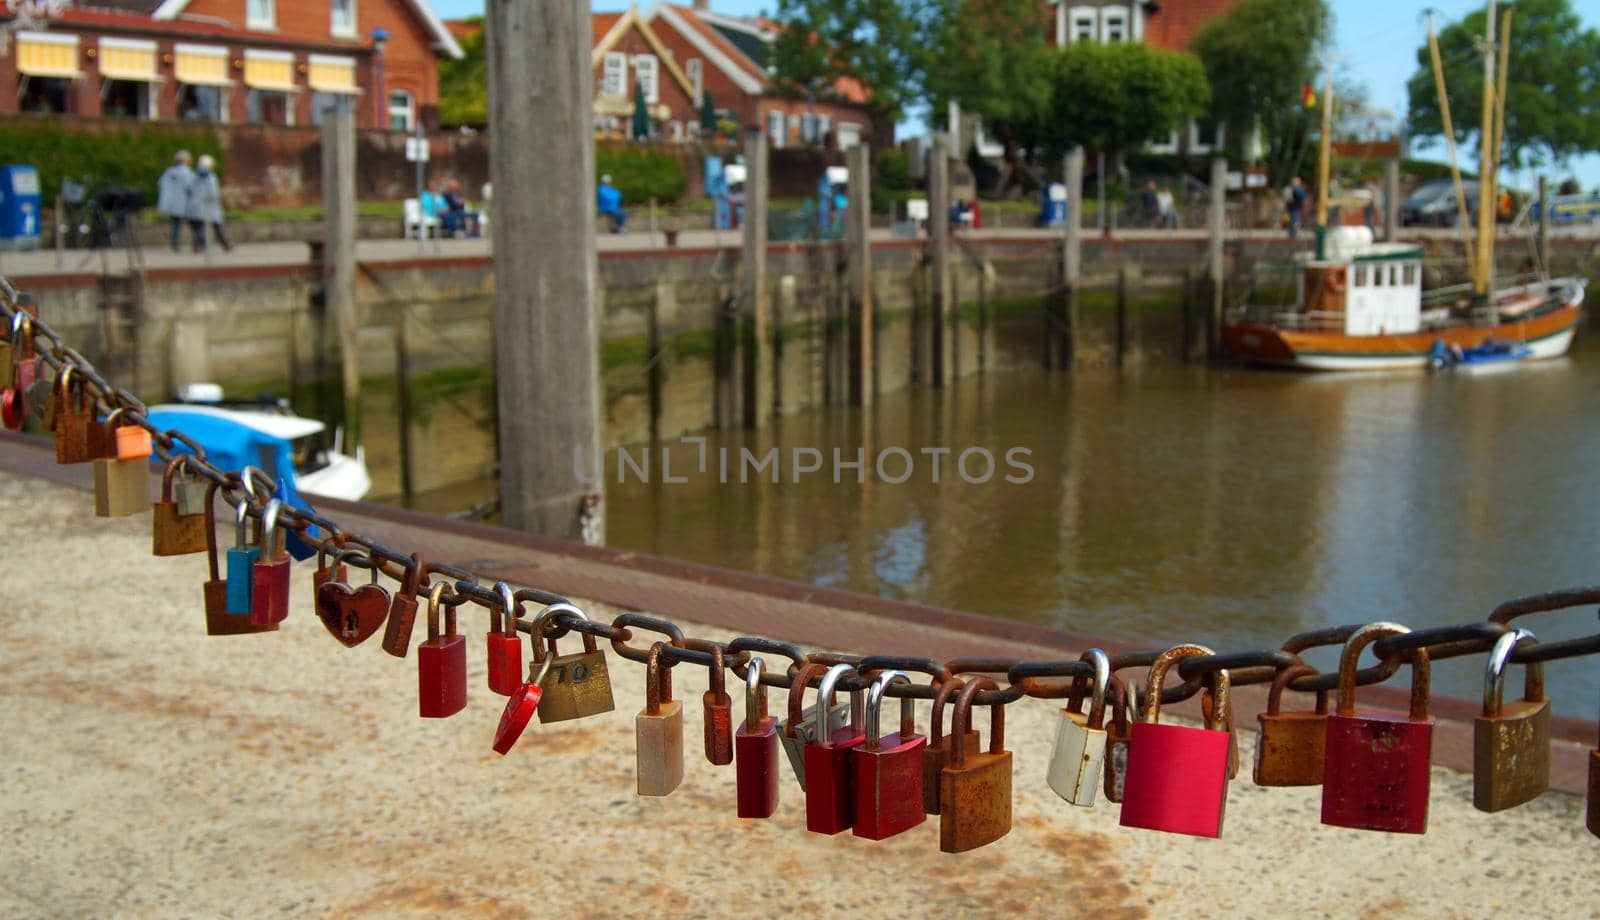 Love padlocks are attached to a rusted chain. In the background you can see the contours of an old fishing port out of focus. People walk on the quay.